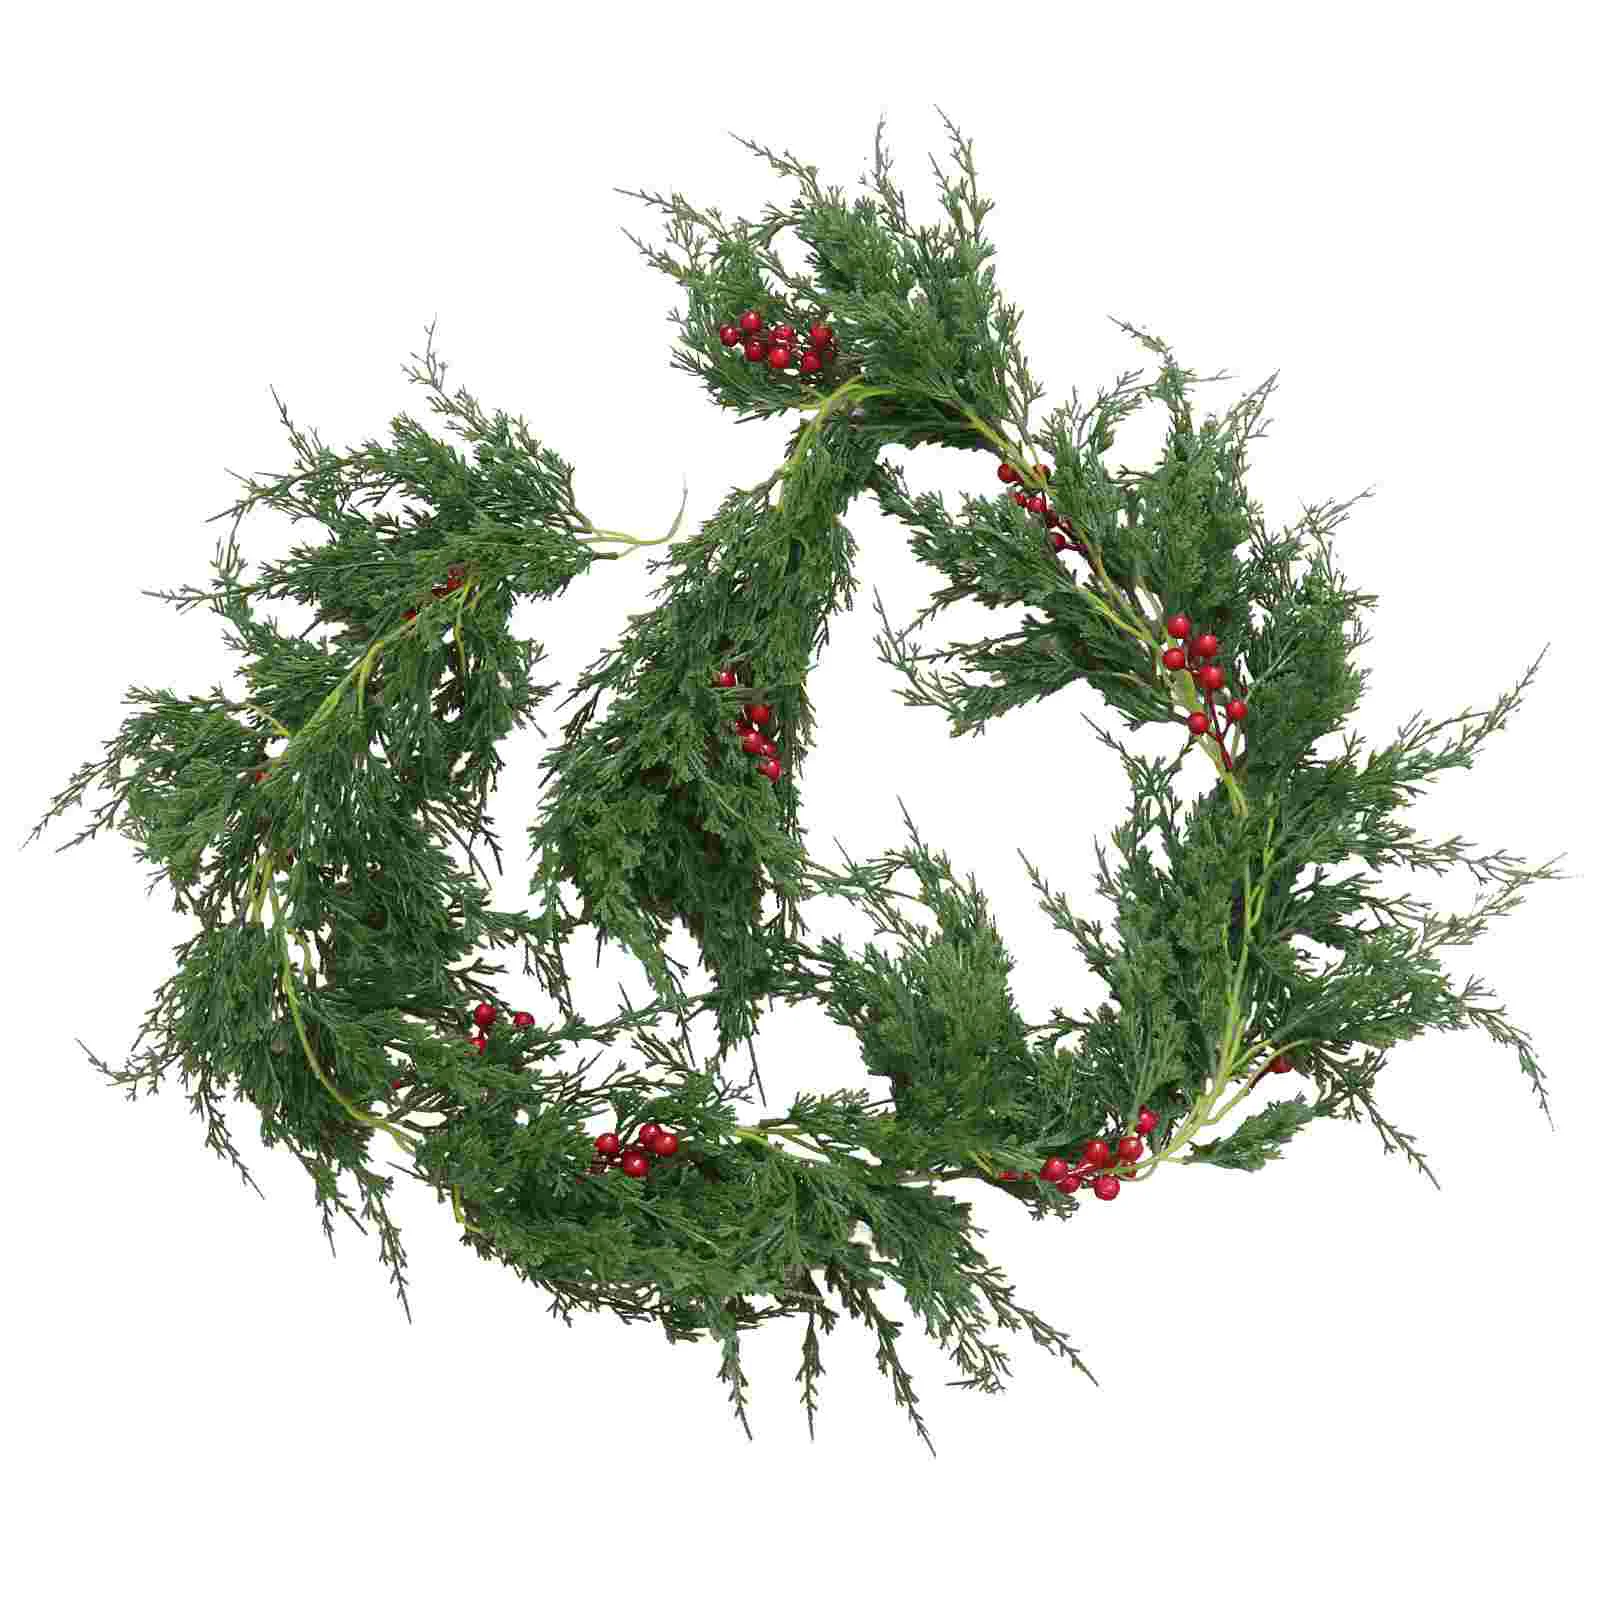 

Garland Christmas Artificial Berry Rattan Holiday Berries Red Stairs Fireplace Holly Tree Frosted Greenery Flowers Home decor